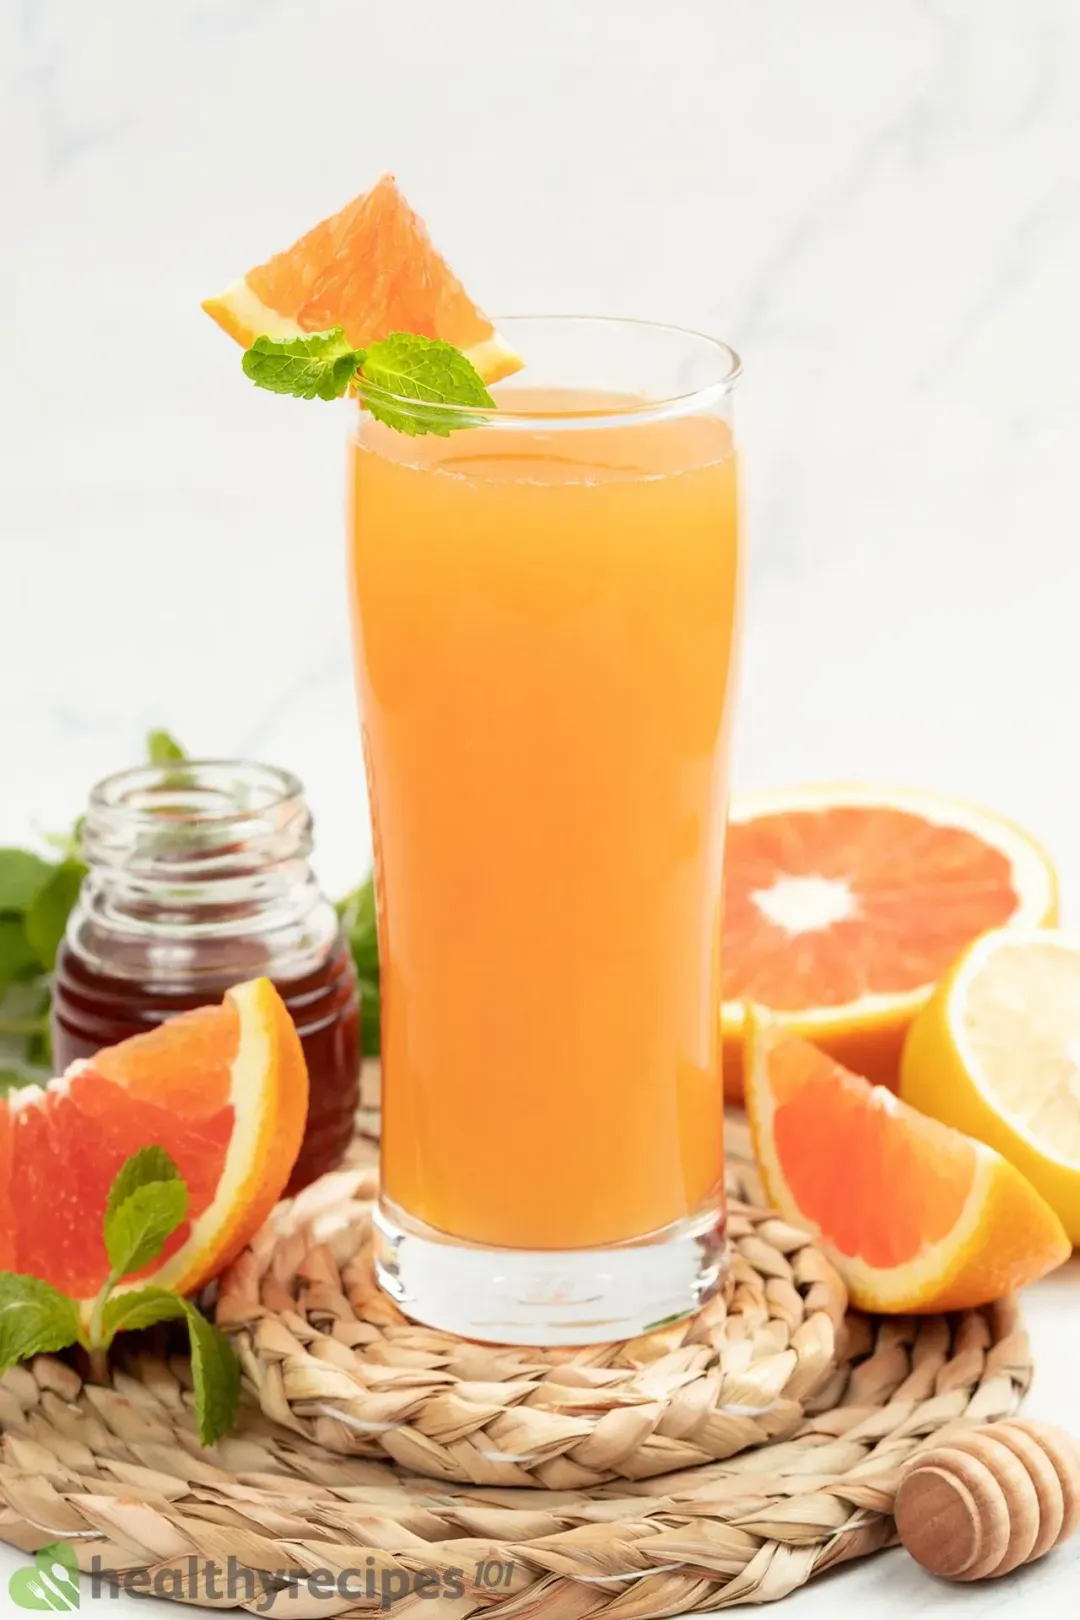 A glass of grapefruit juice garnished with mints, next to grapefruit wedges and a jar of honey